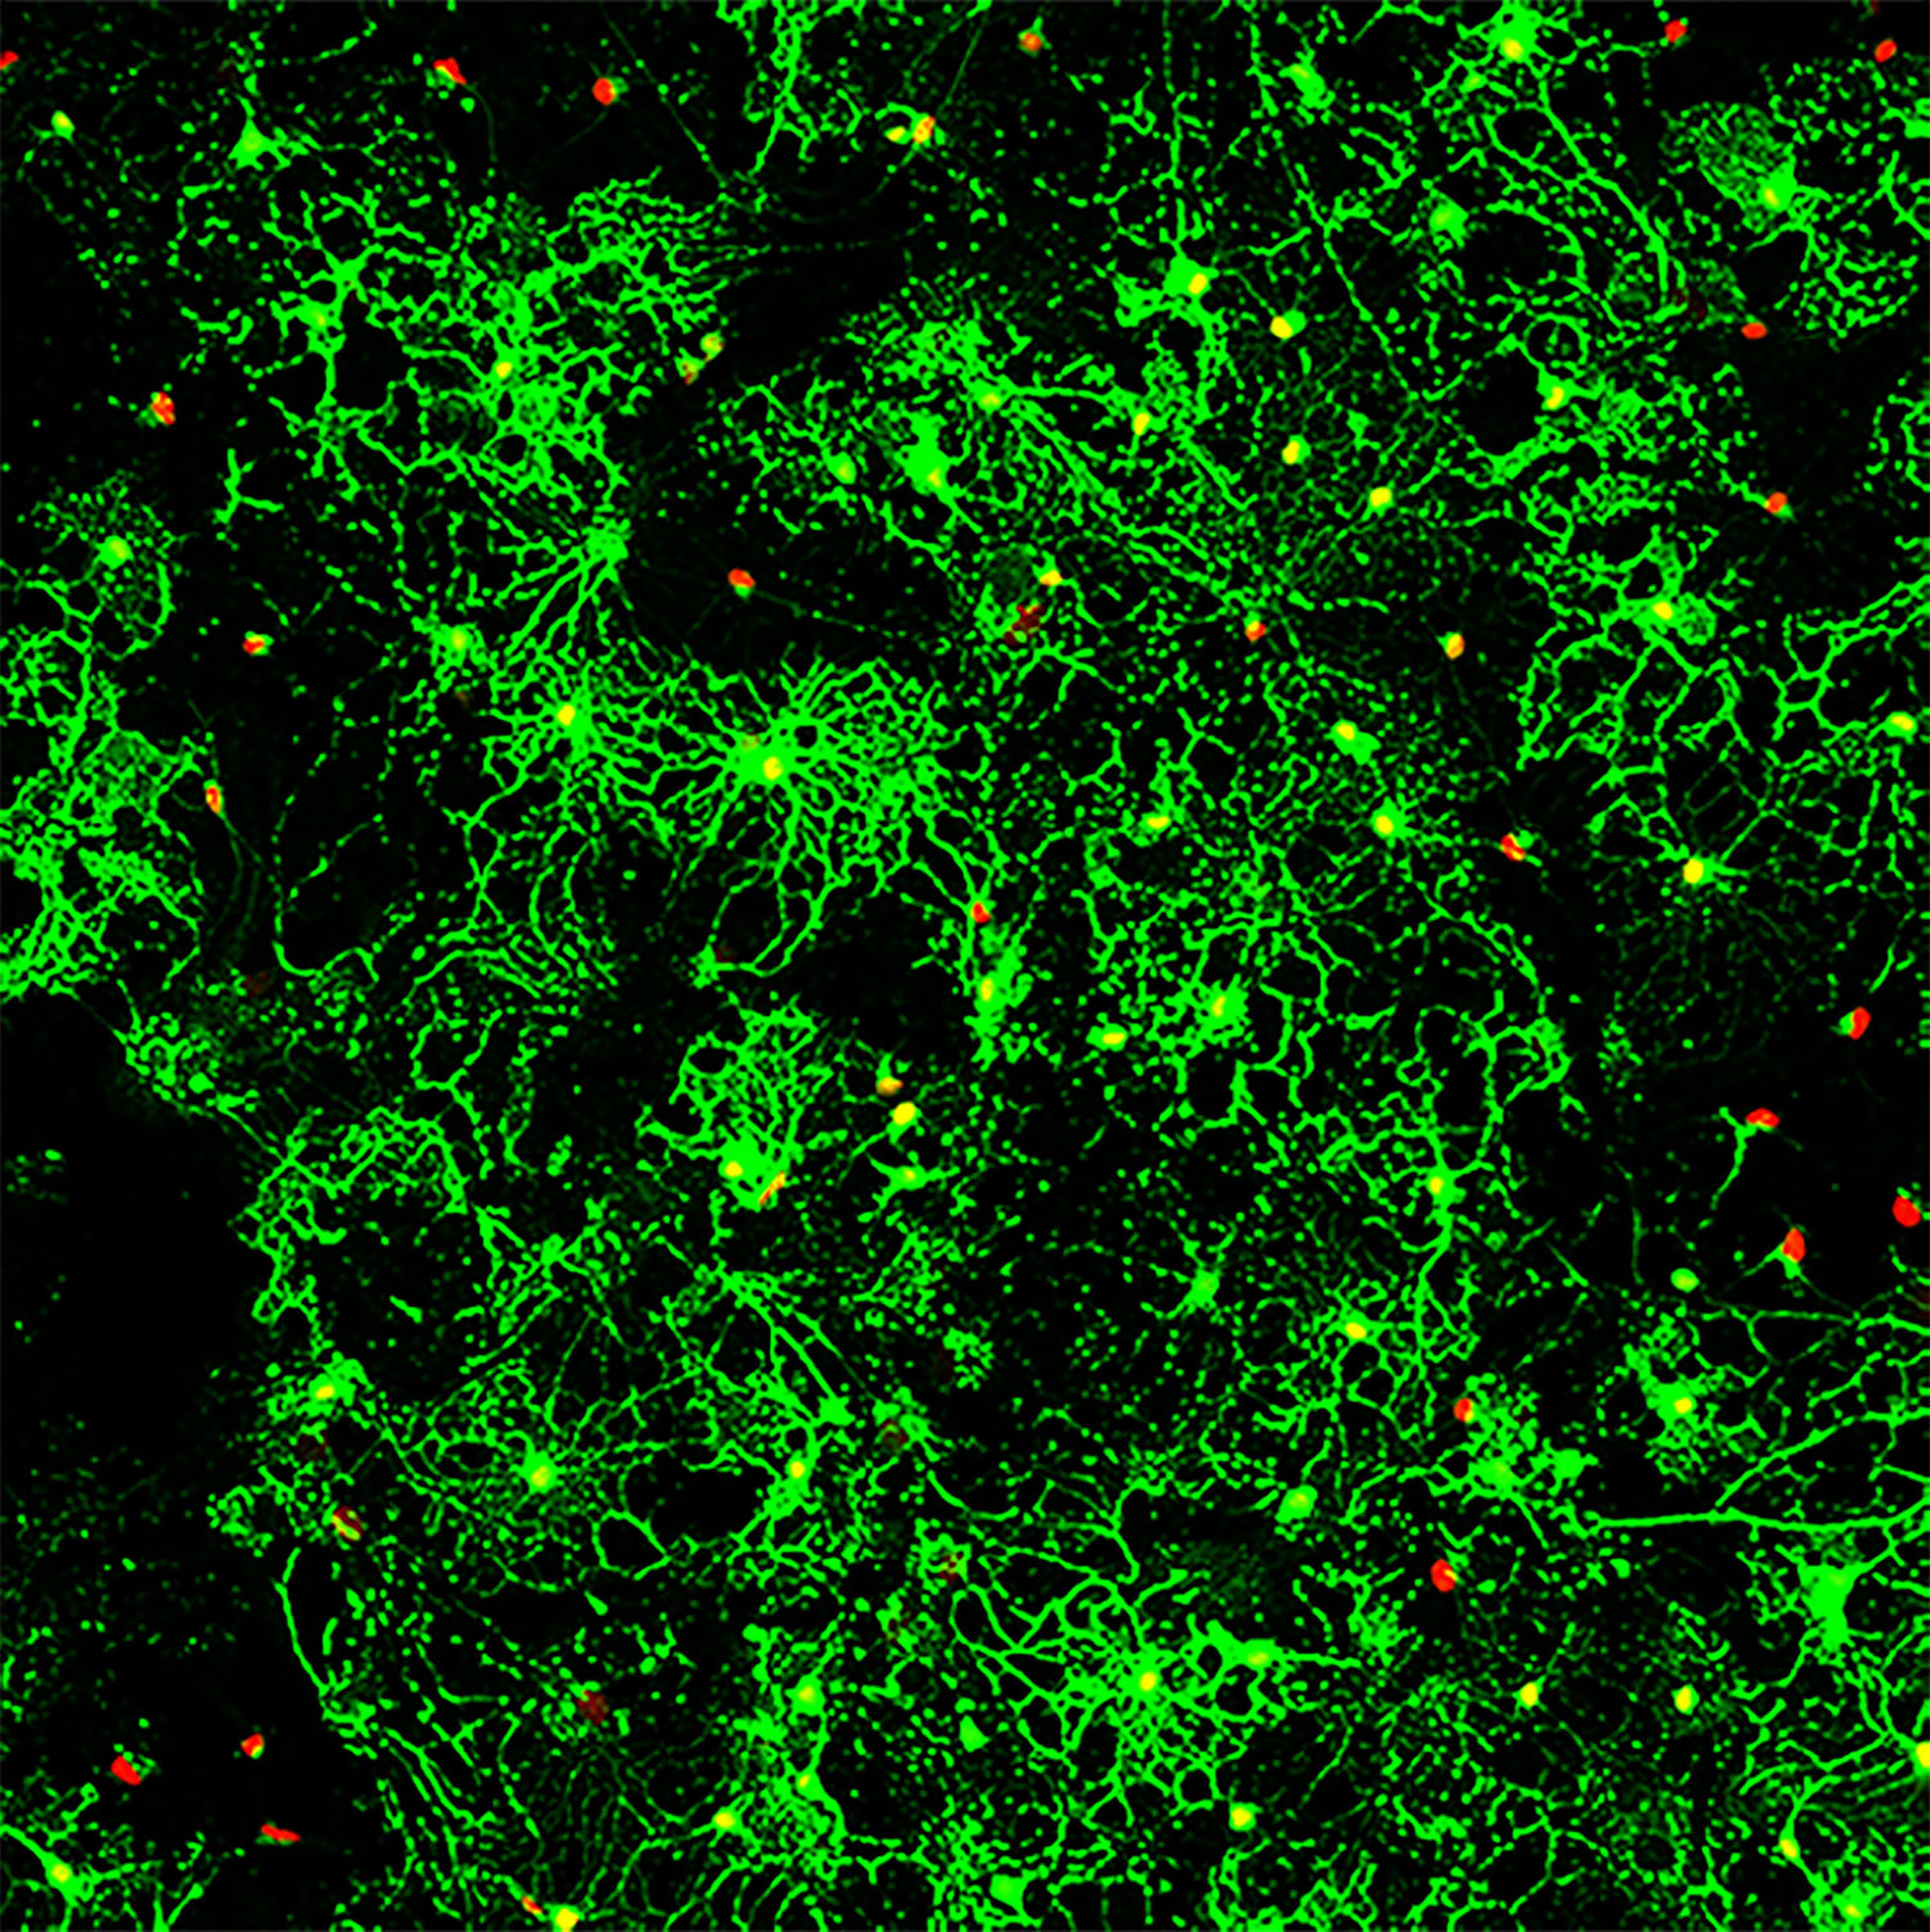 Nodes of connected nerve cells show myelin production activity.